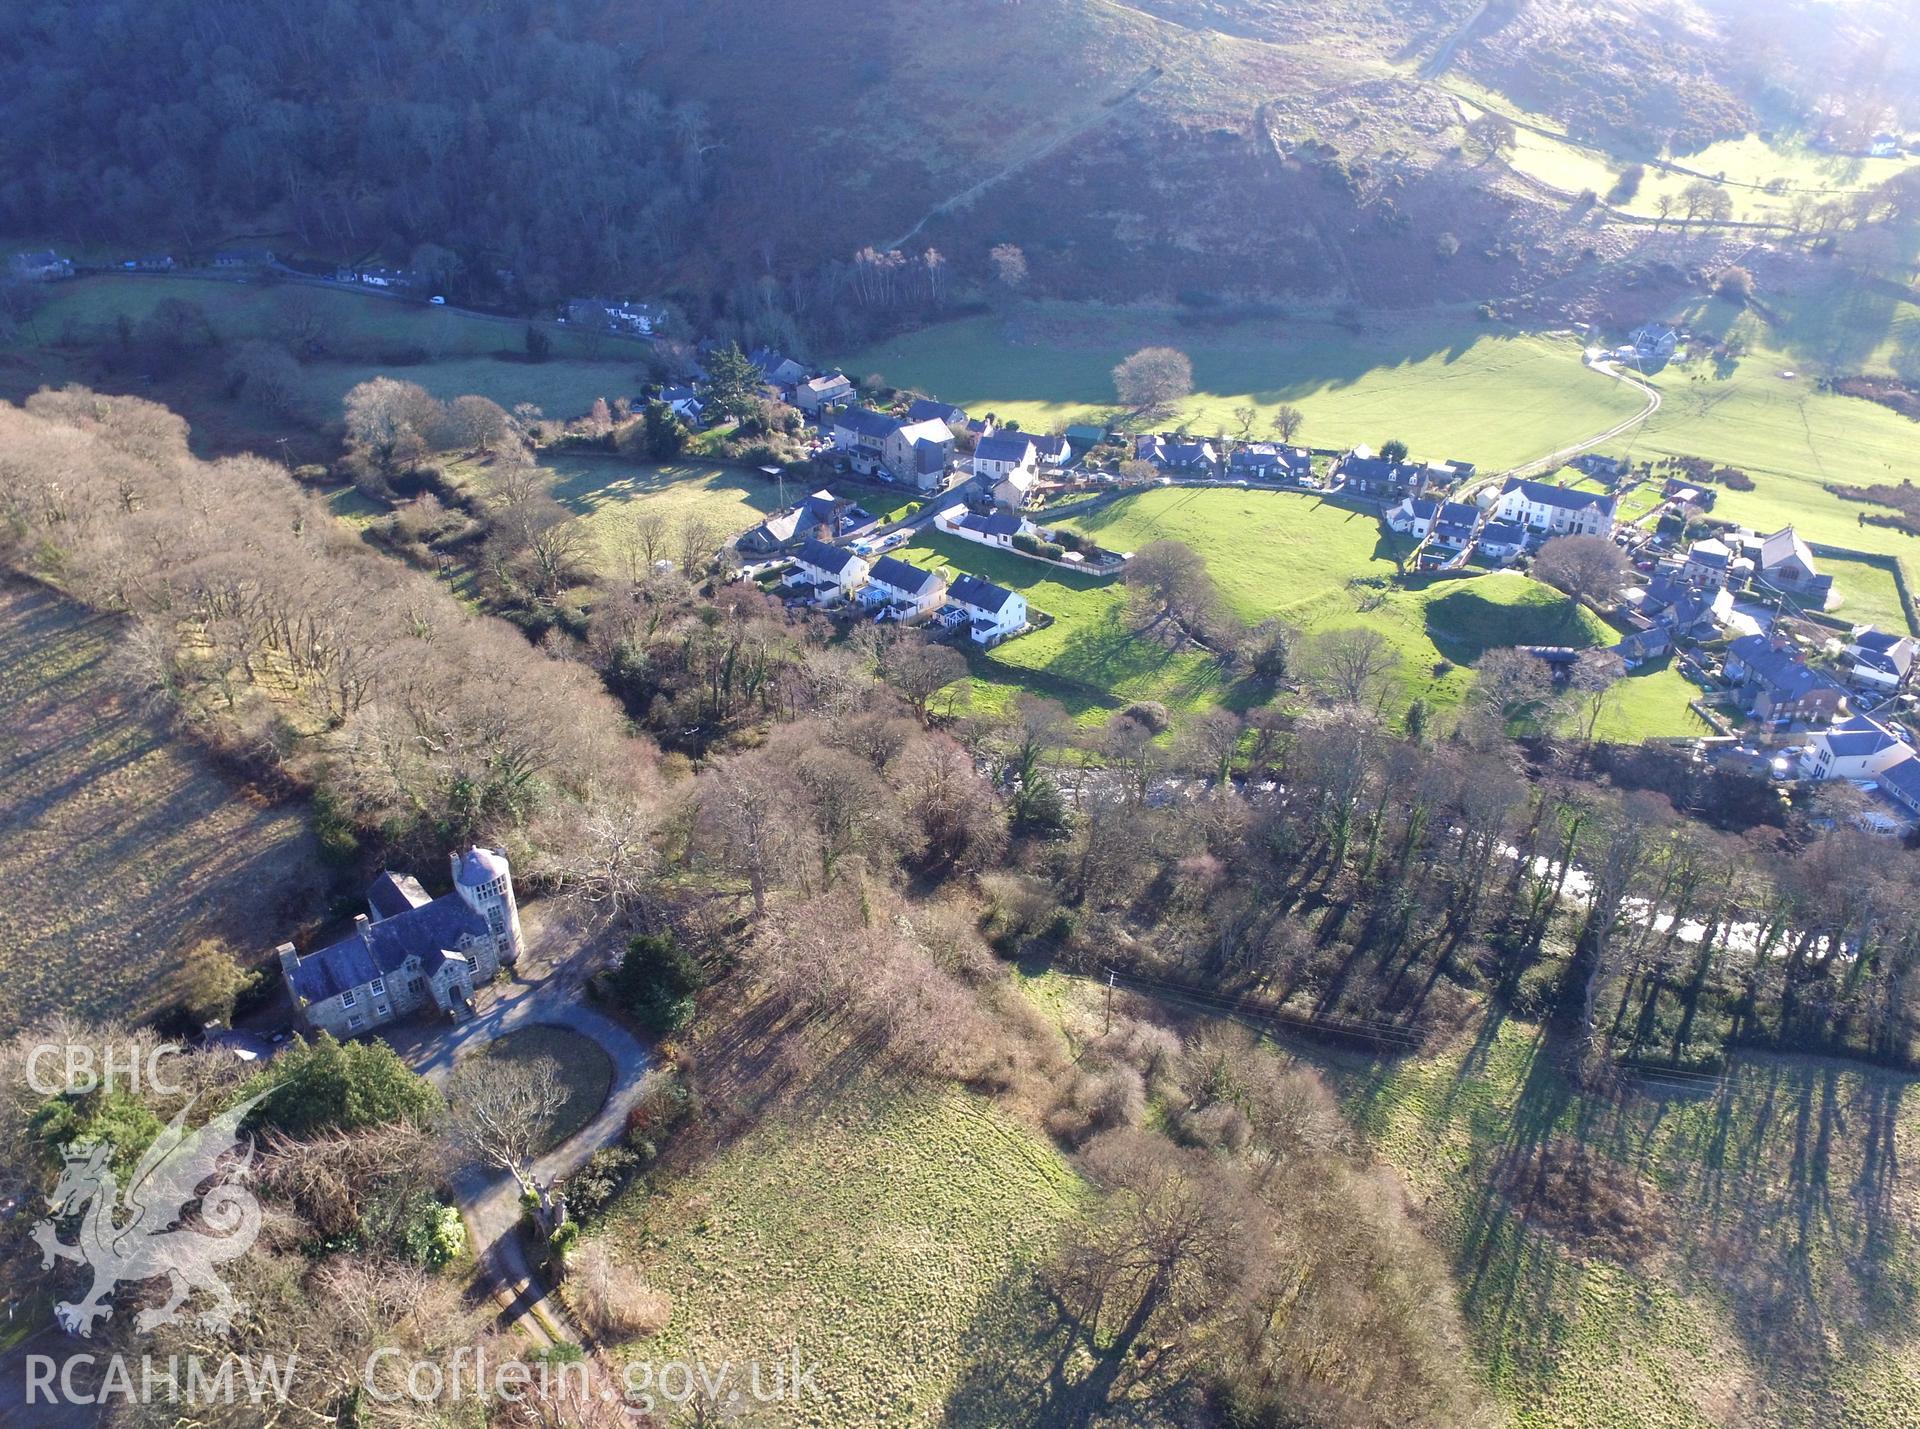 Photo showing view of Aber, taken by Paul R. Davis, February 2018.